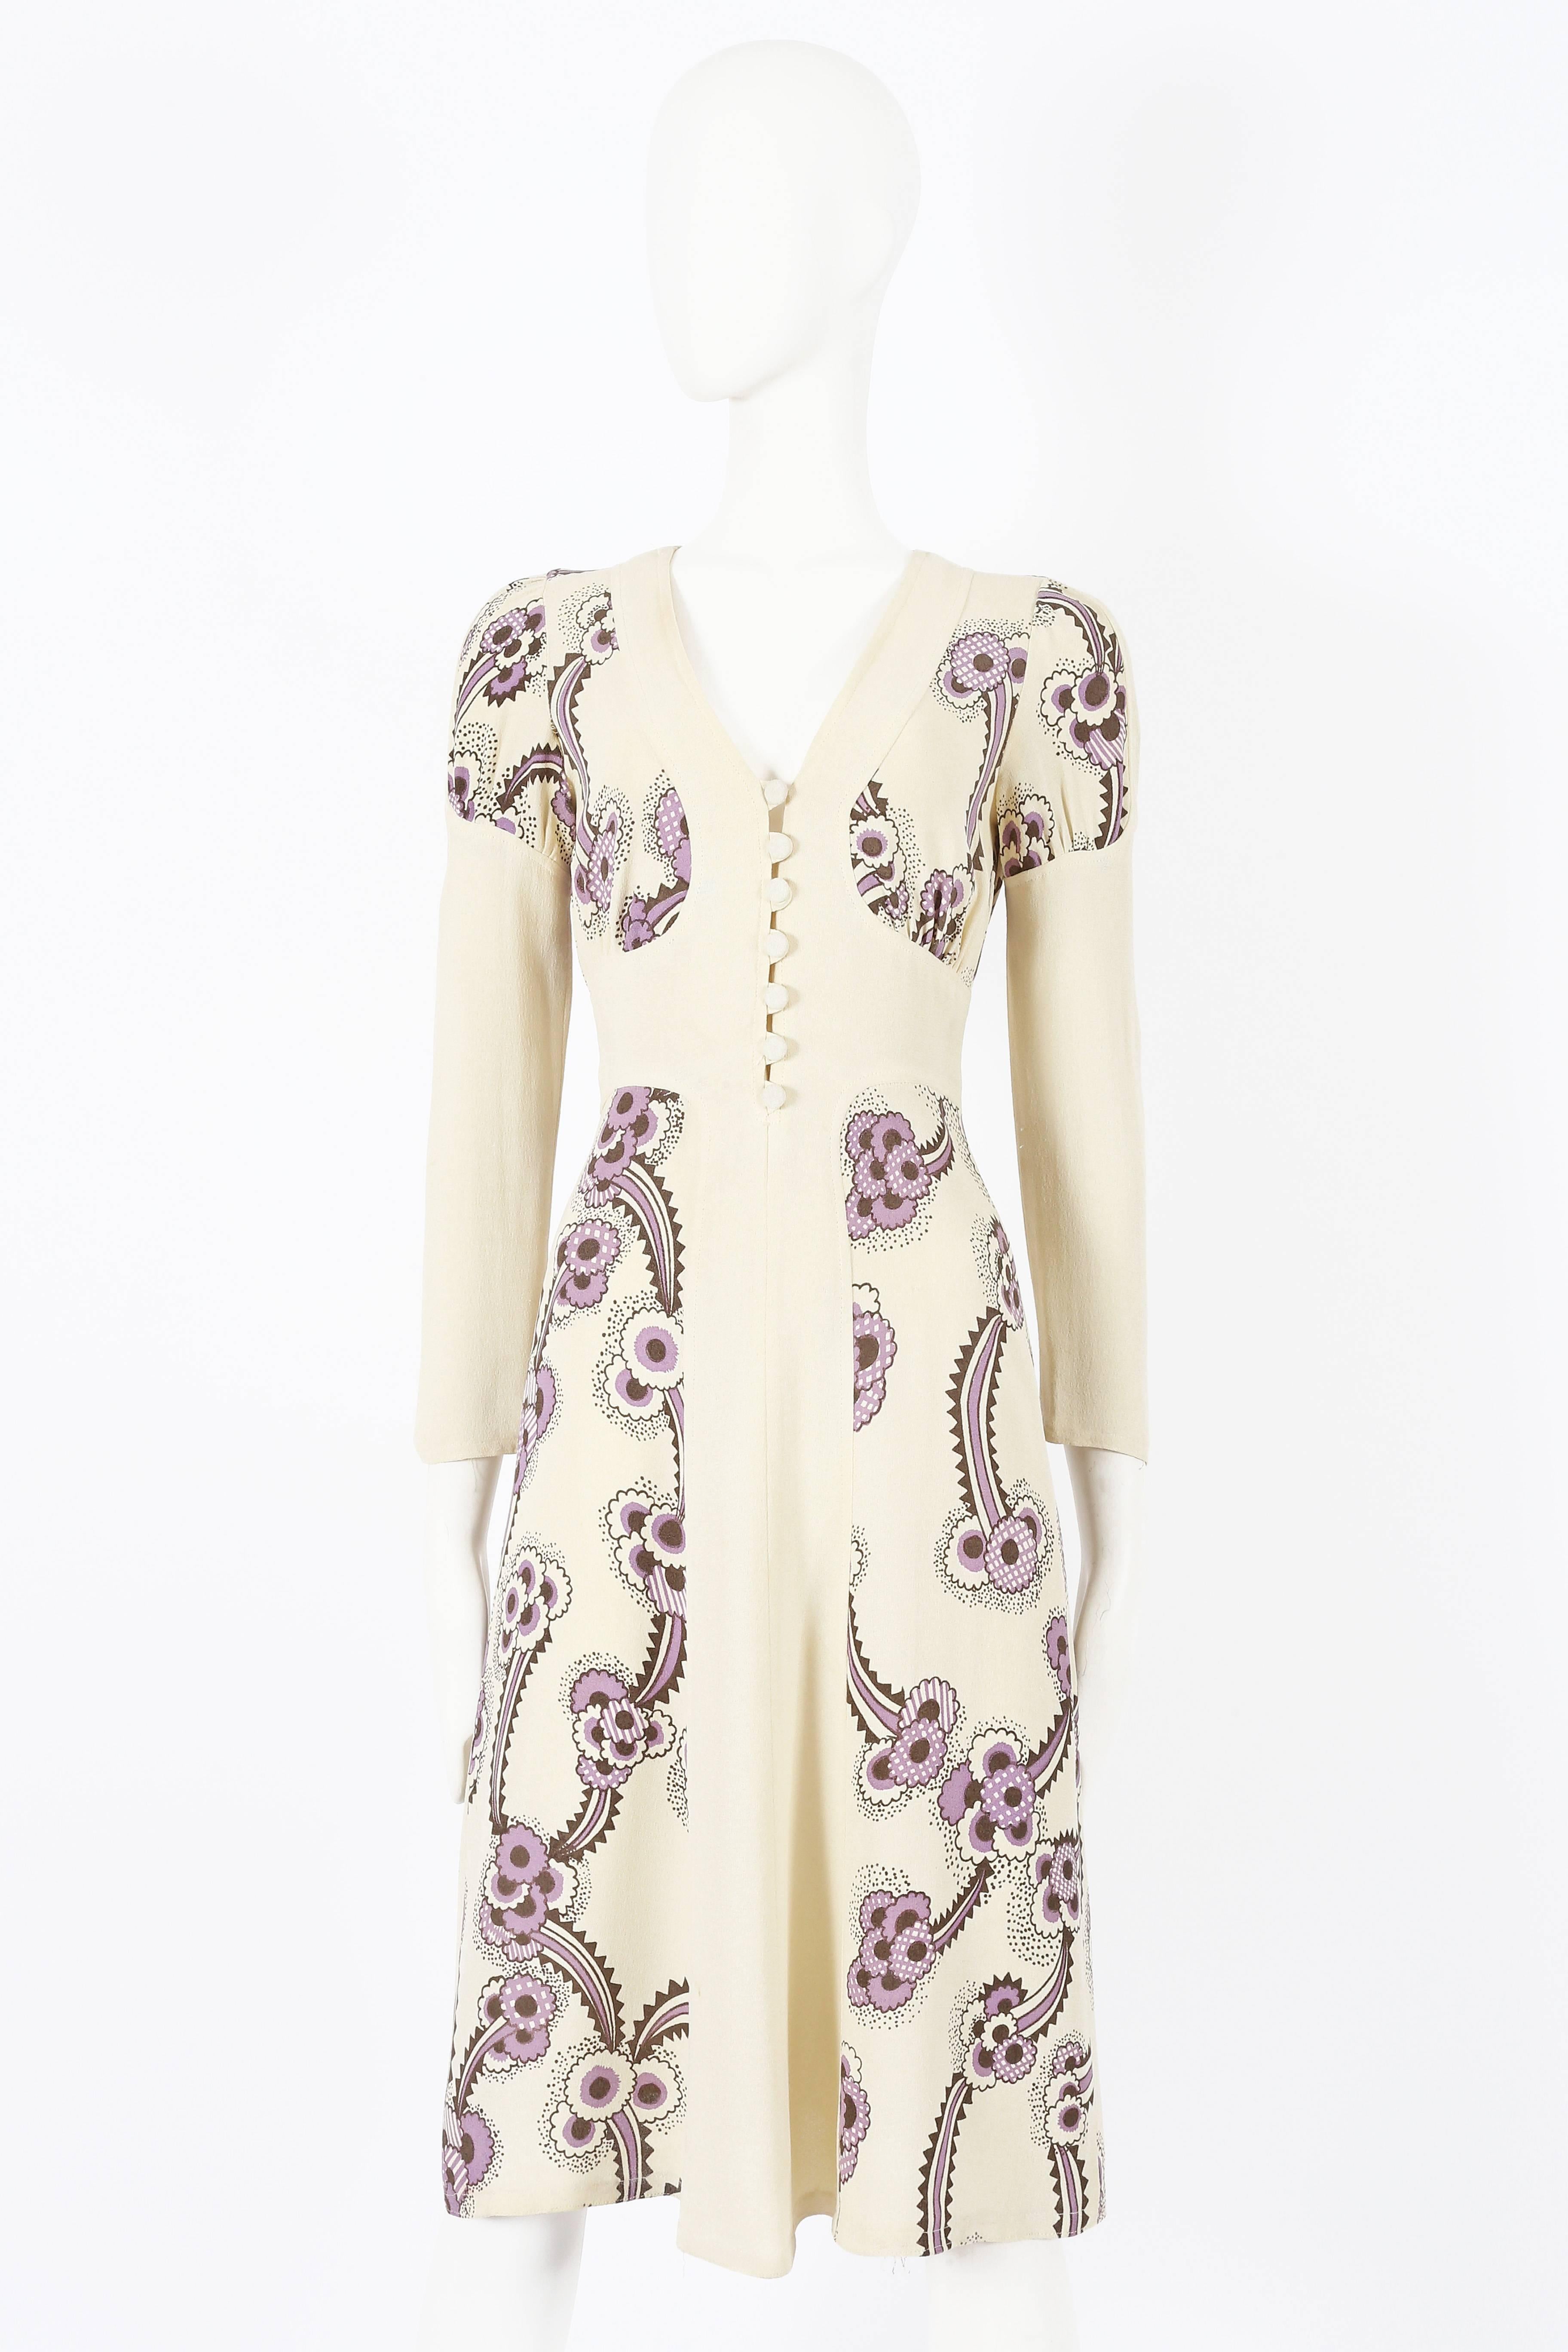 Rare Ossie Clark ivory moss crepe dress, with 'Floating Daisies' print by Celia Birtwell. Circa 1970s.